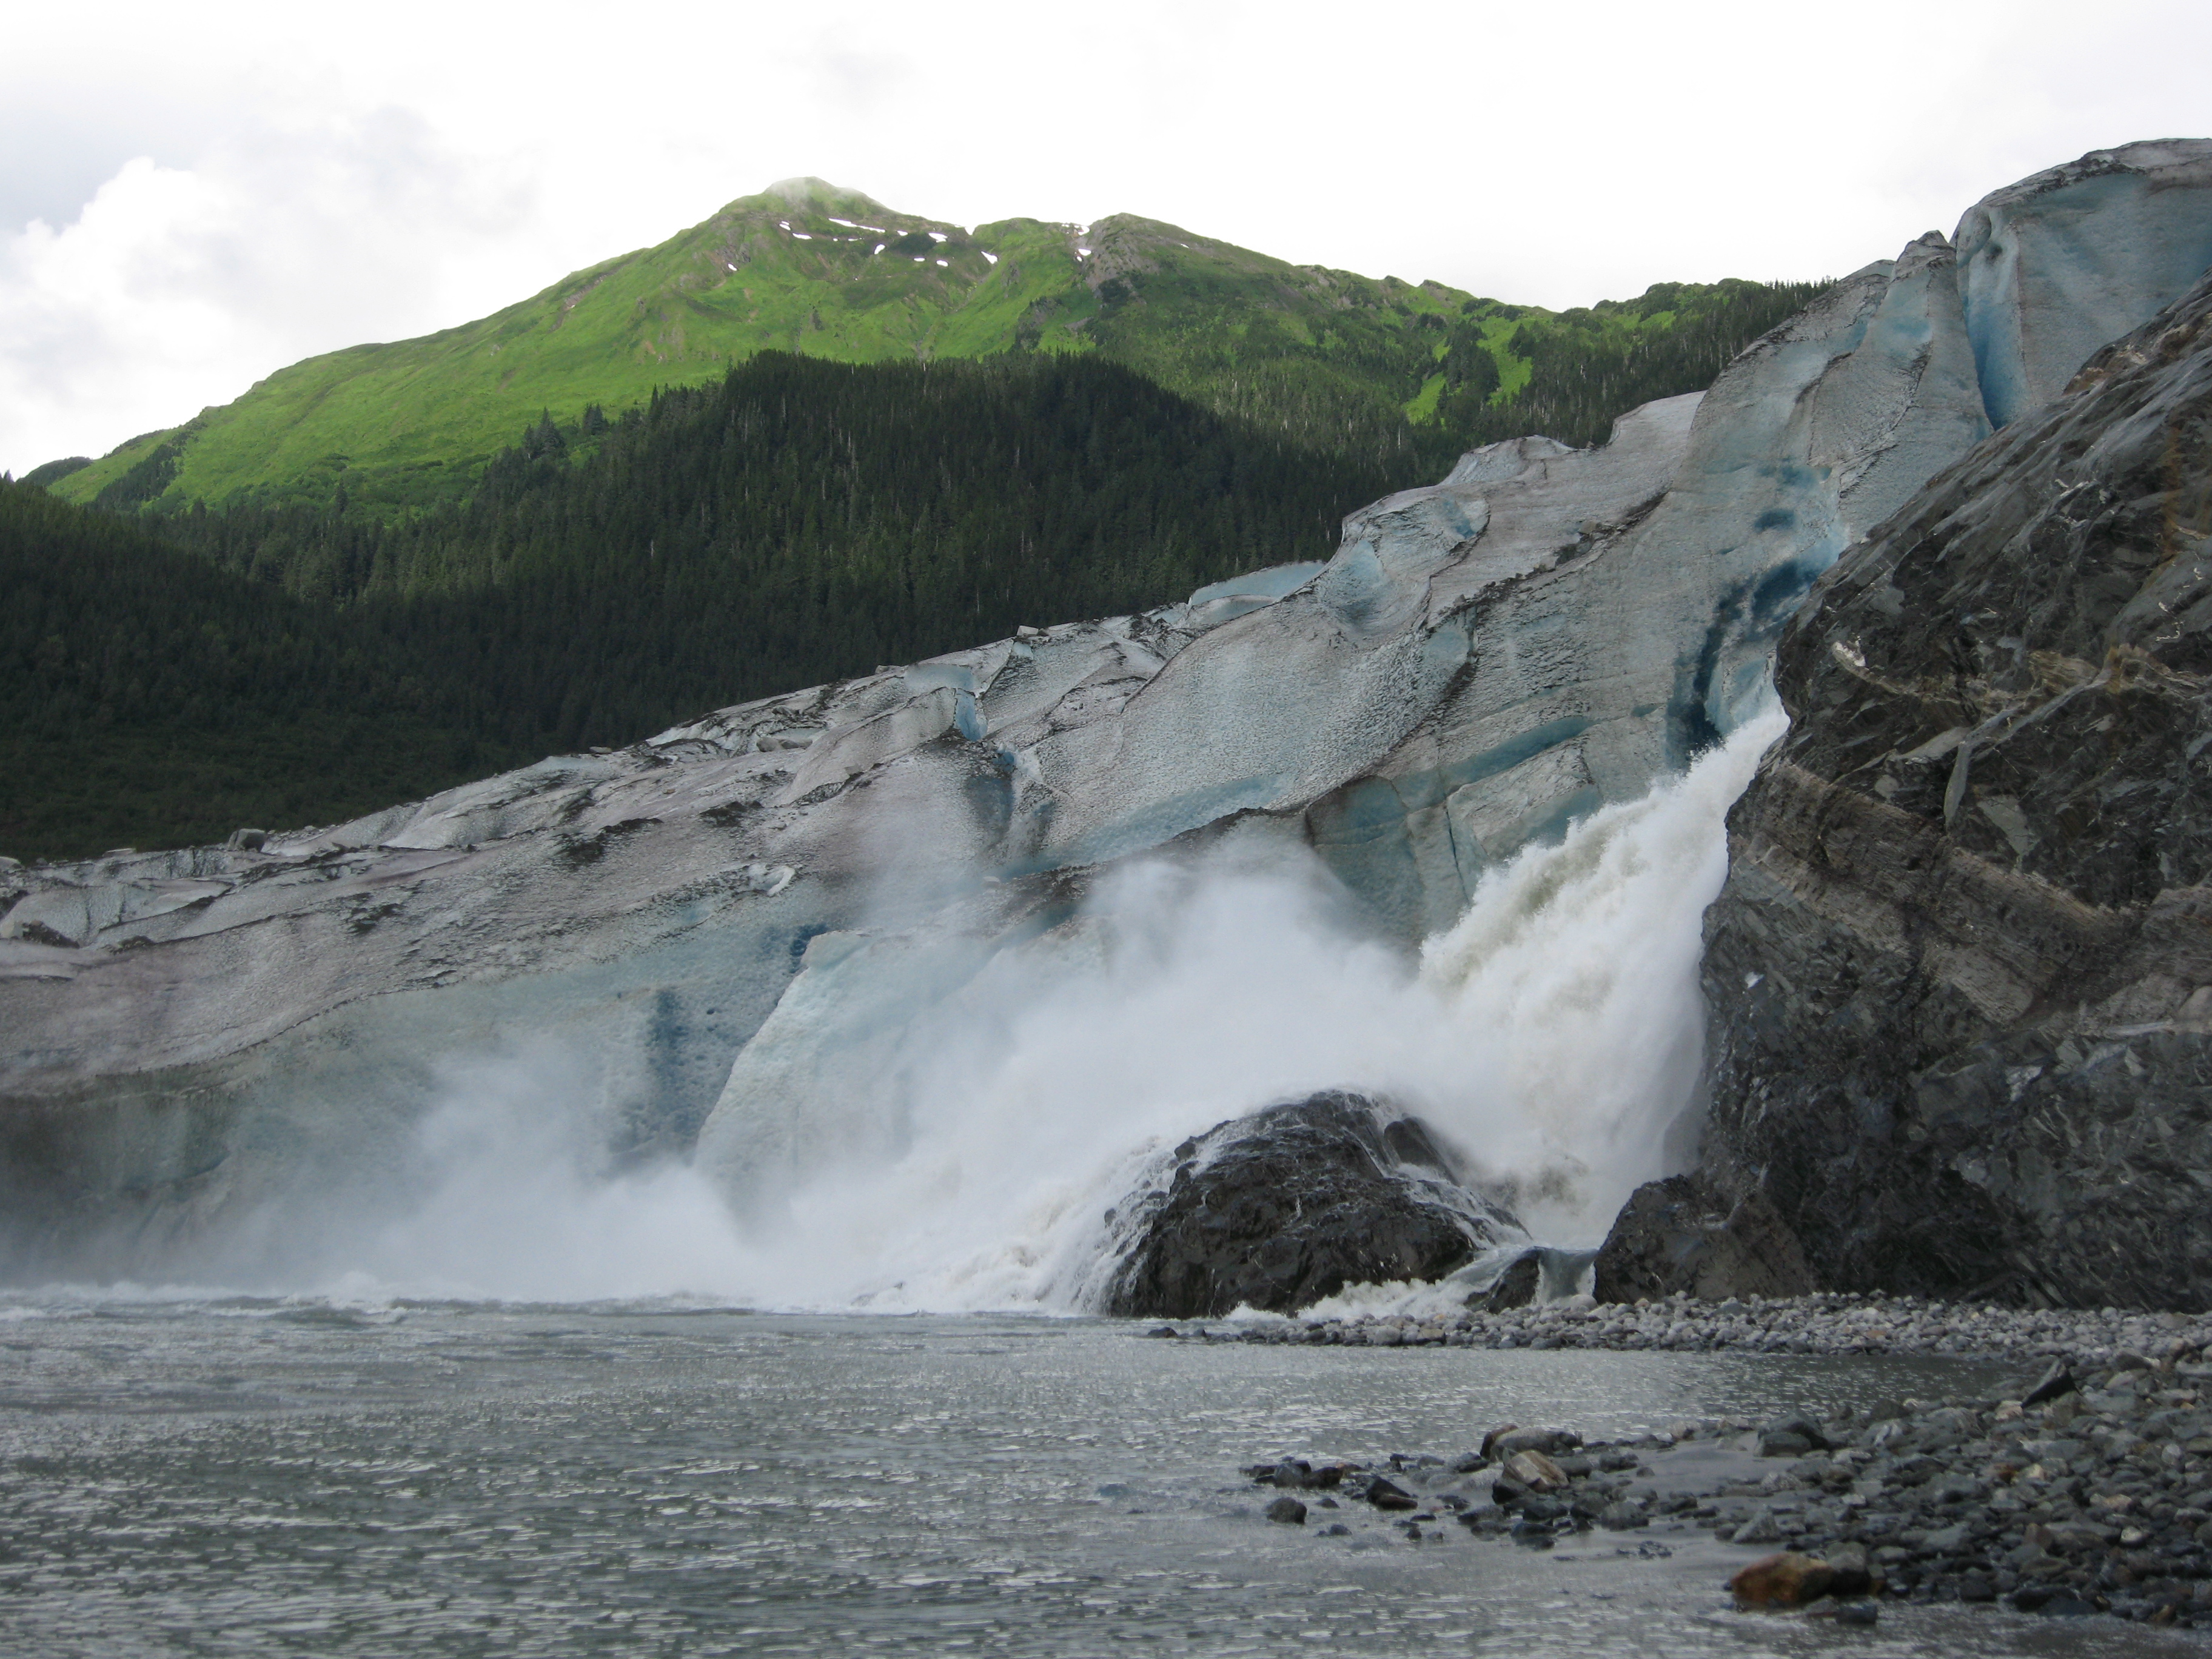 A melting glacier in front of a mountain.